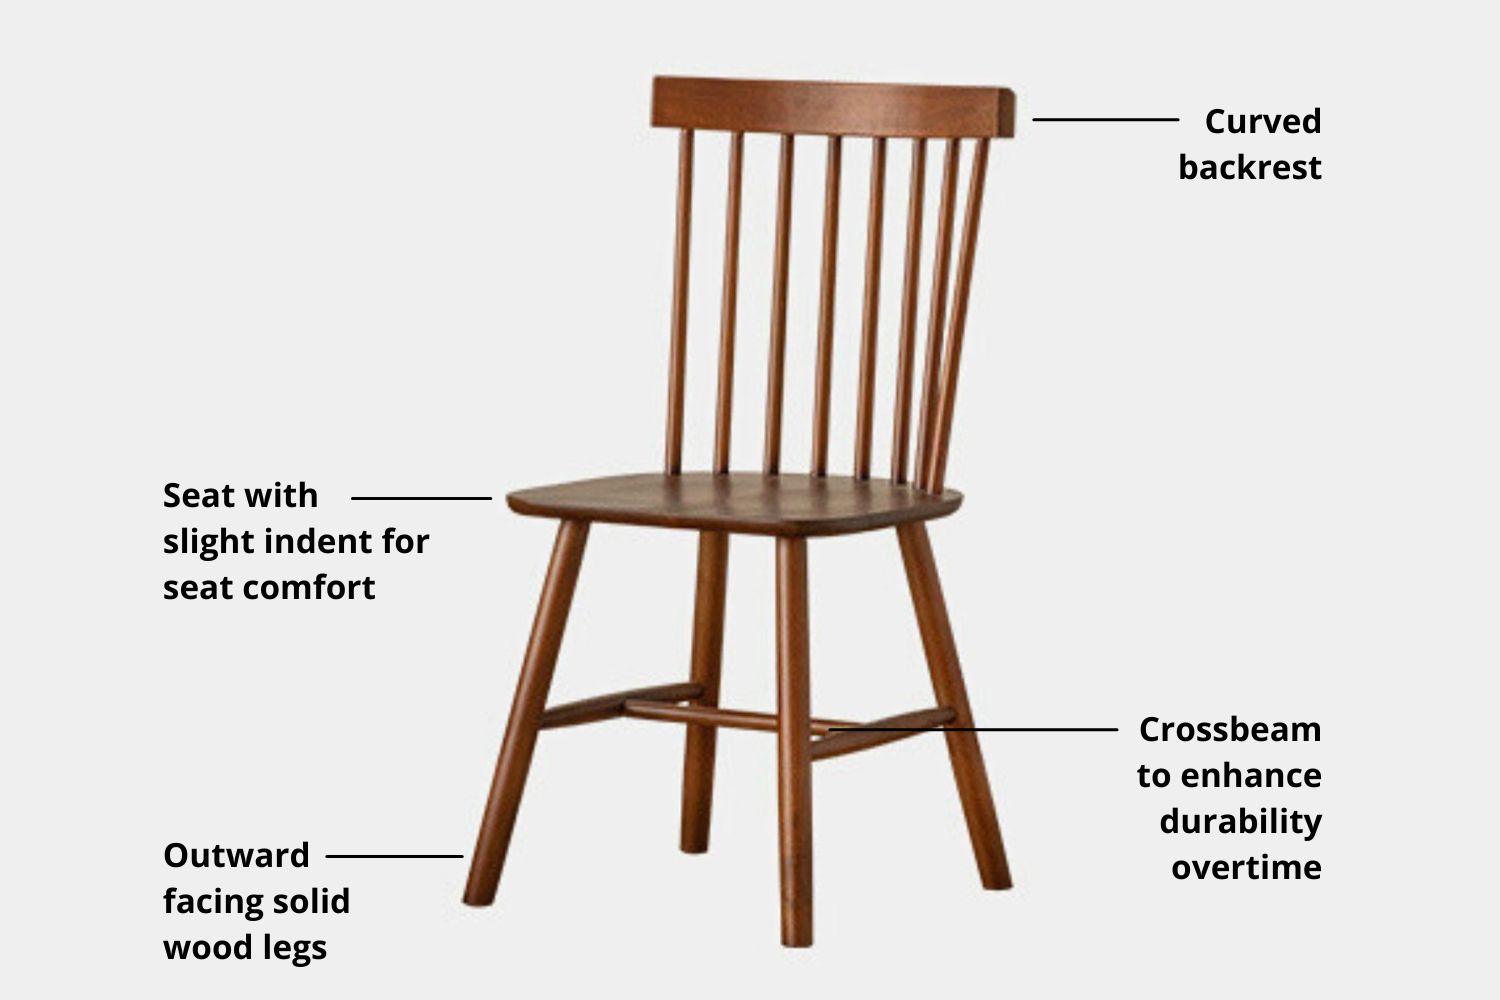 Key features for product for Toby Poplar Wood Chair